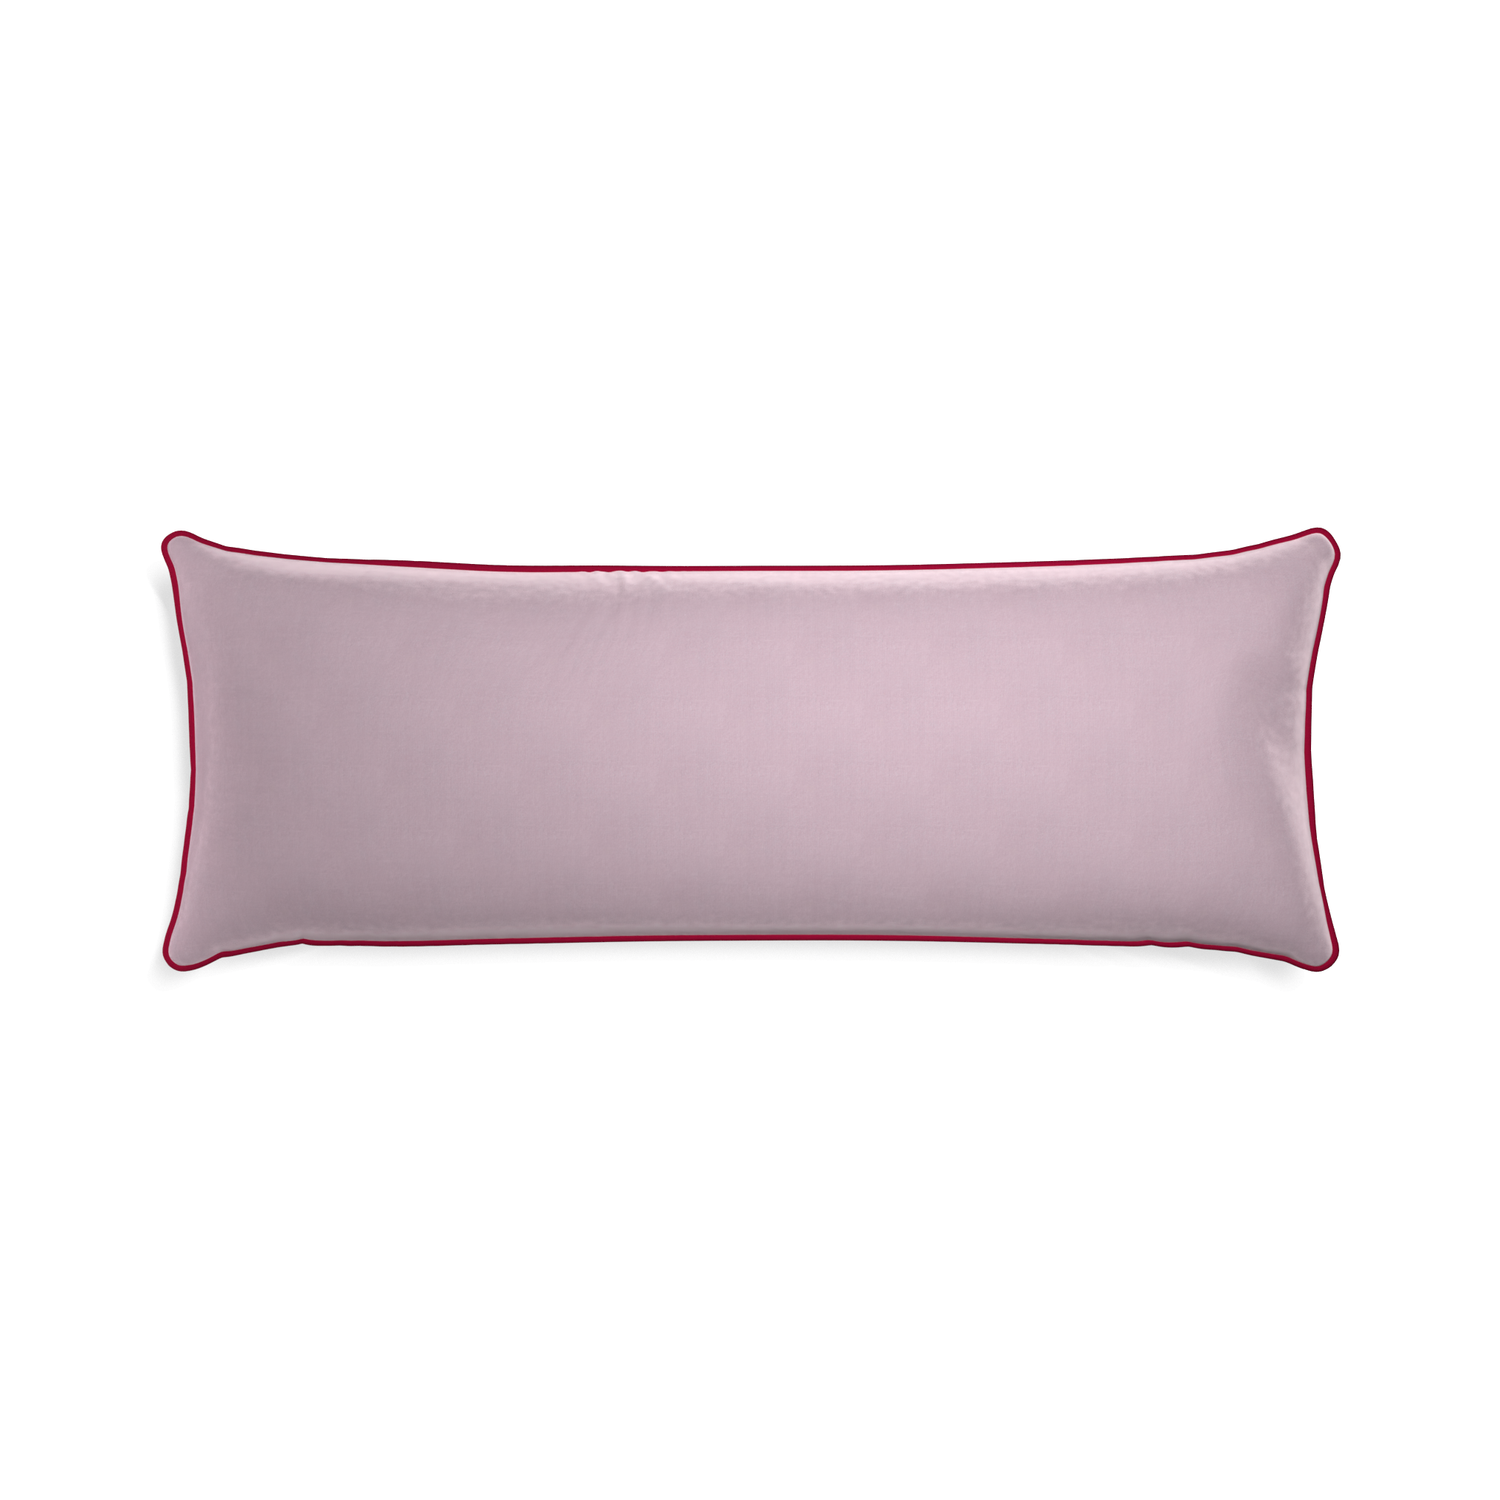 rectangle lilac velvet pillow with dark red piping 